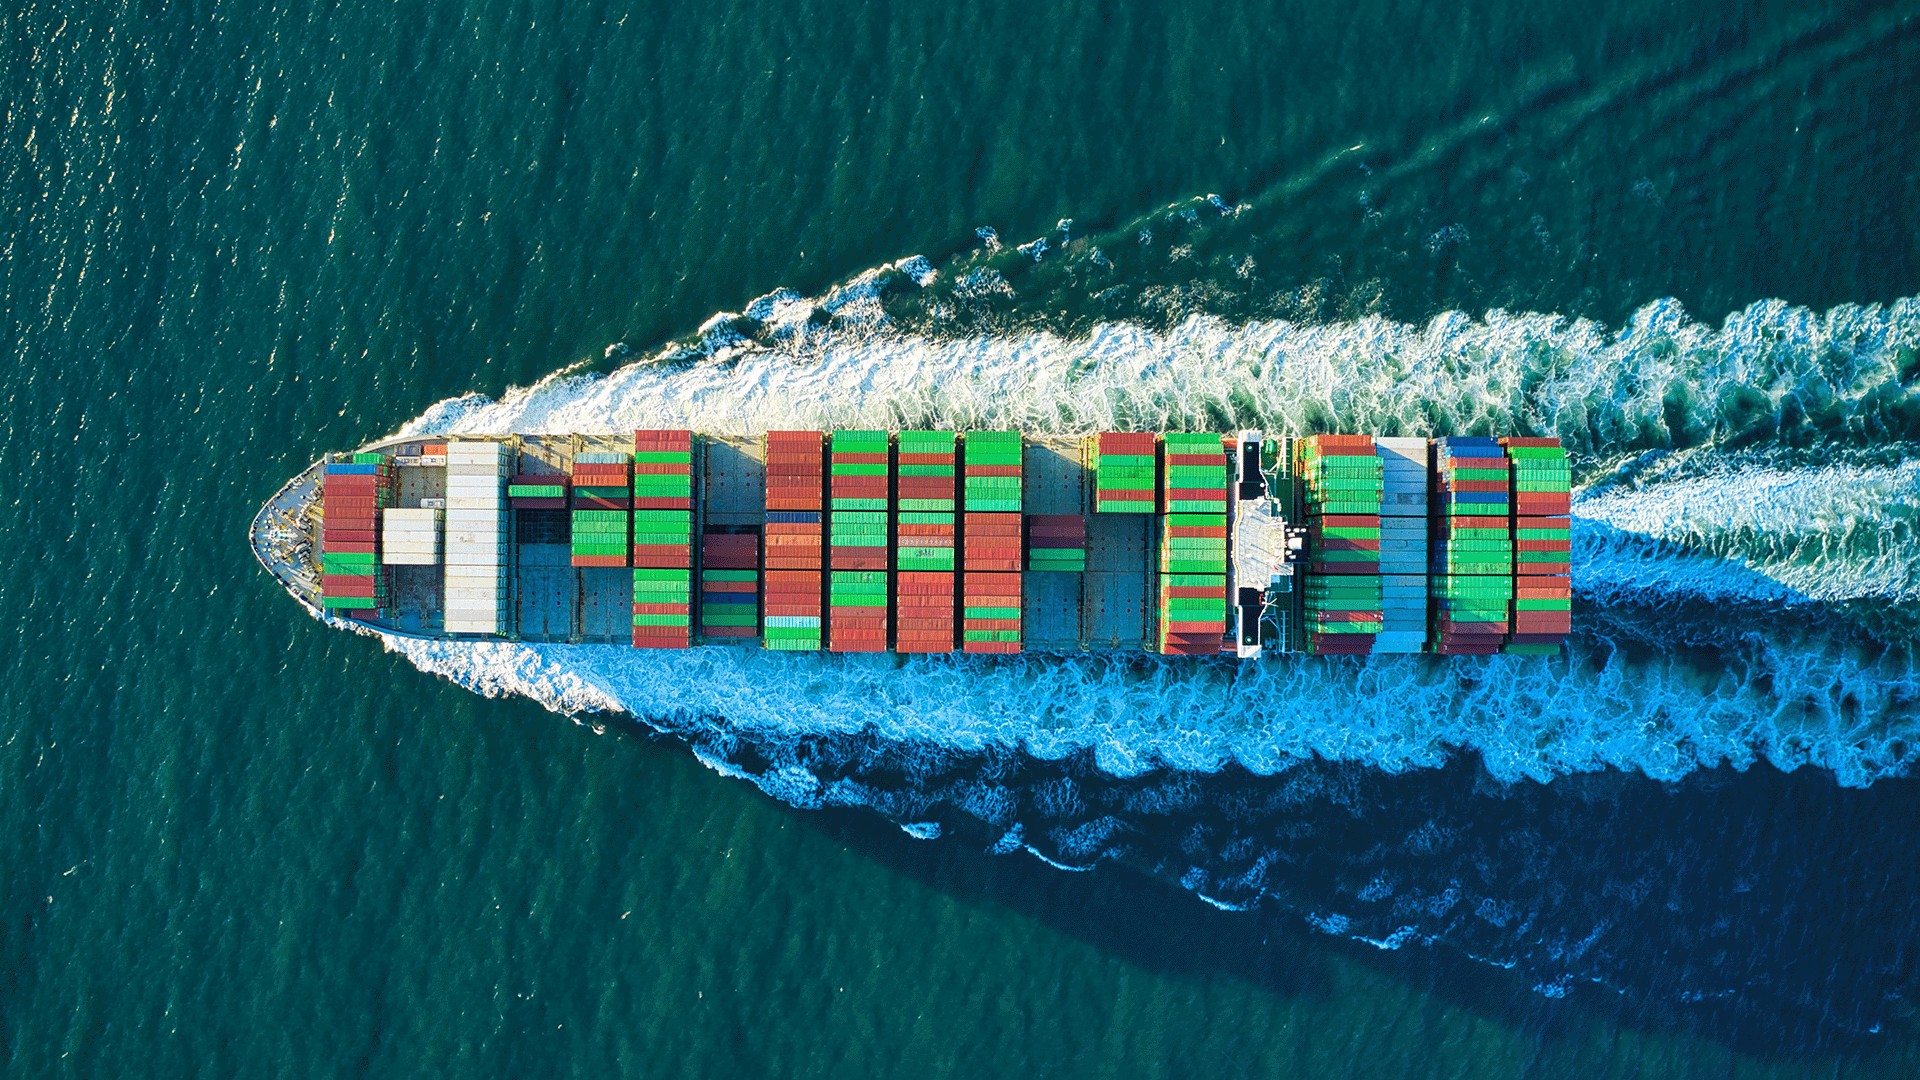 The International Maritime Organization has set a target of achieving net-zero emissions in the shipping industry by 2050.